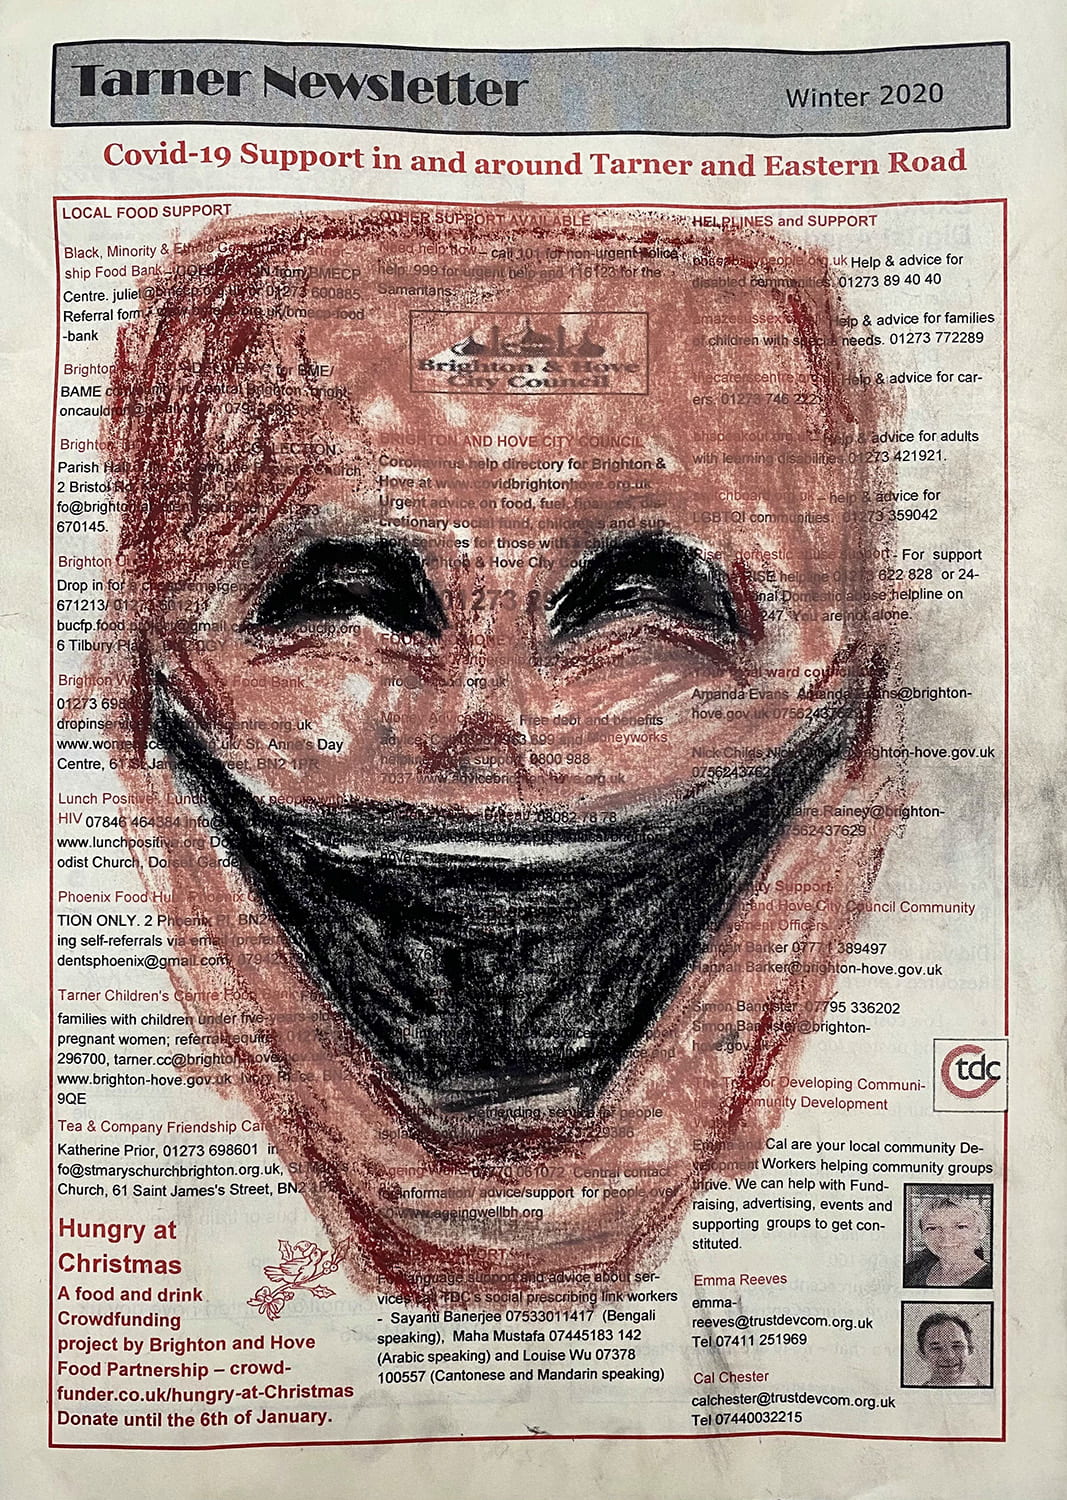 Red laughing face on newsprint page